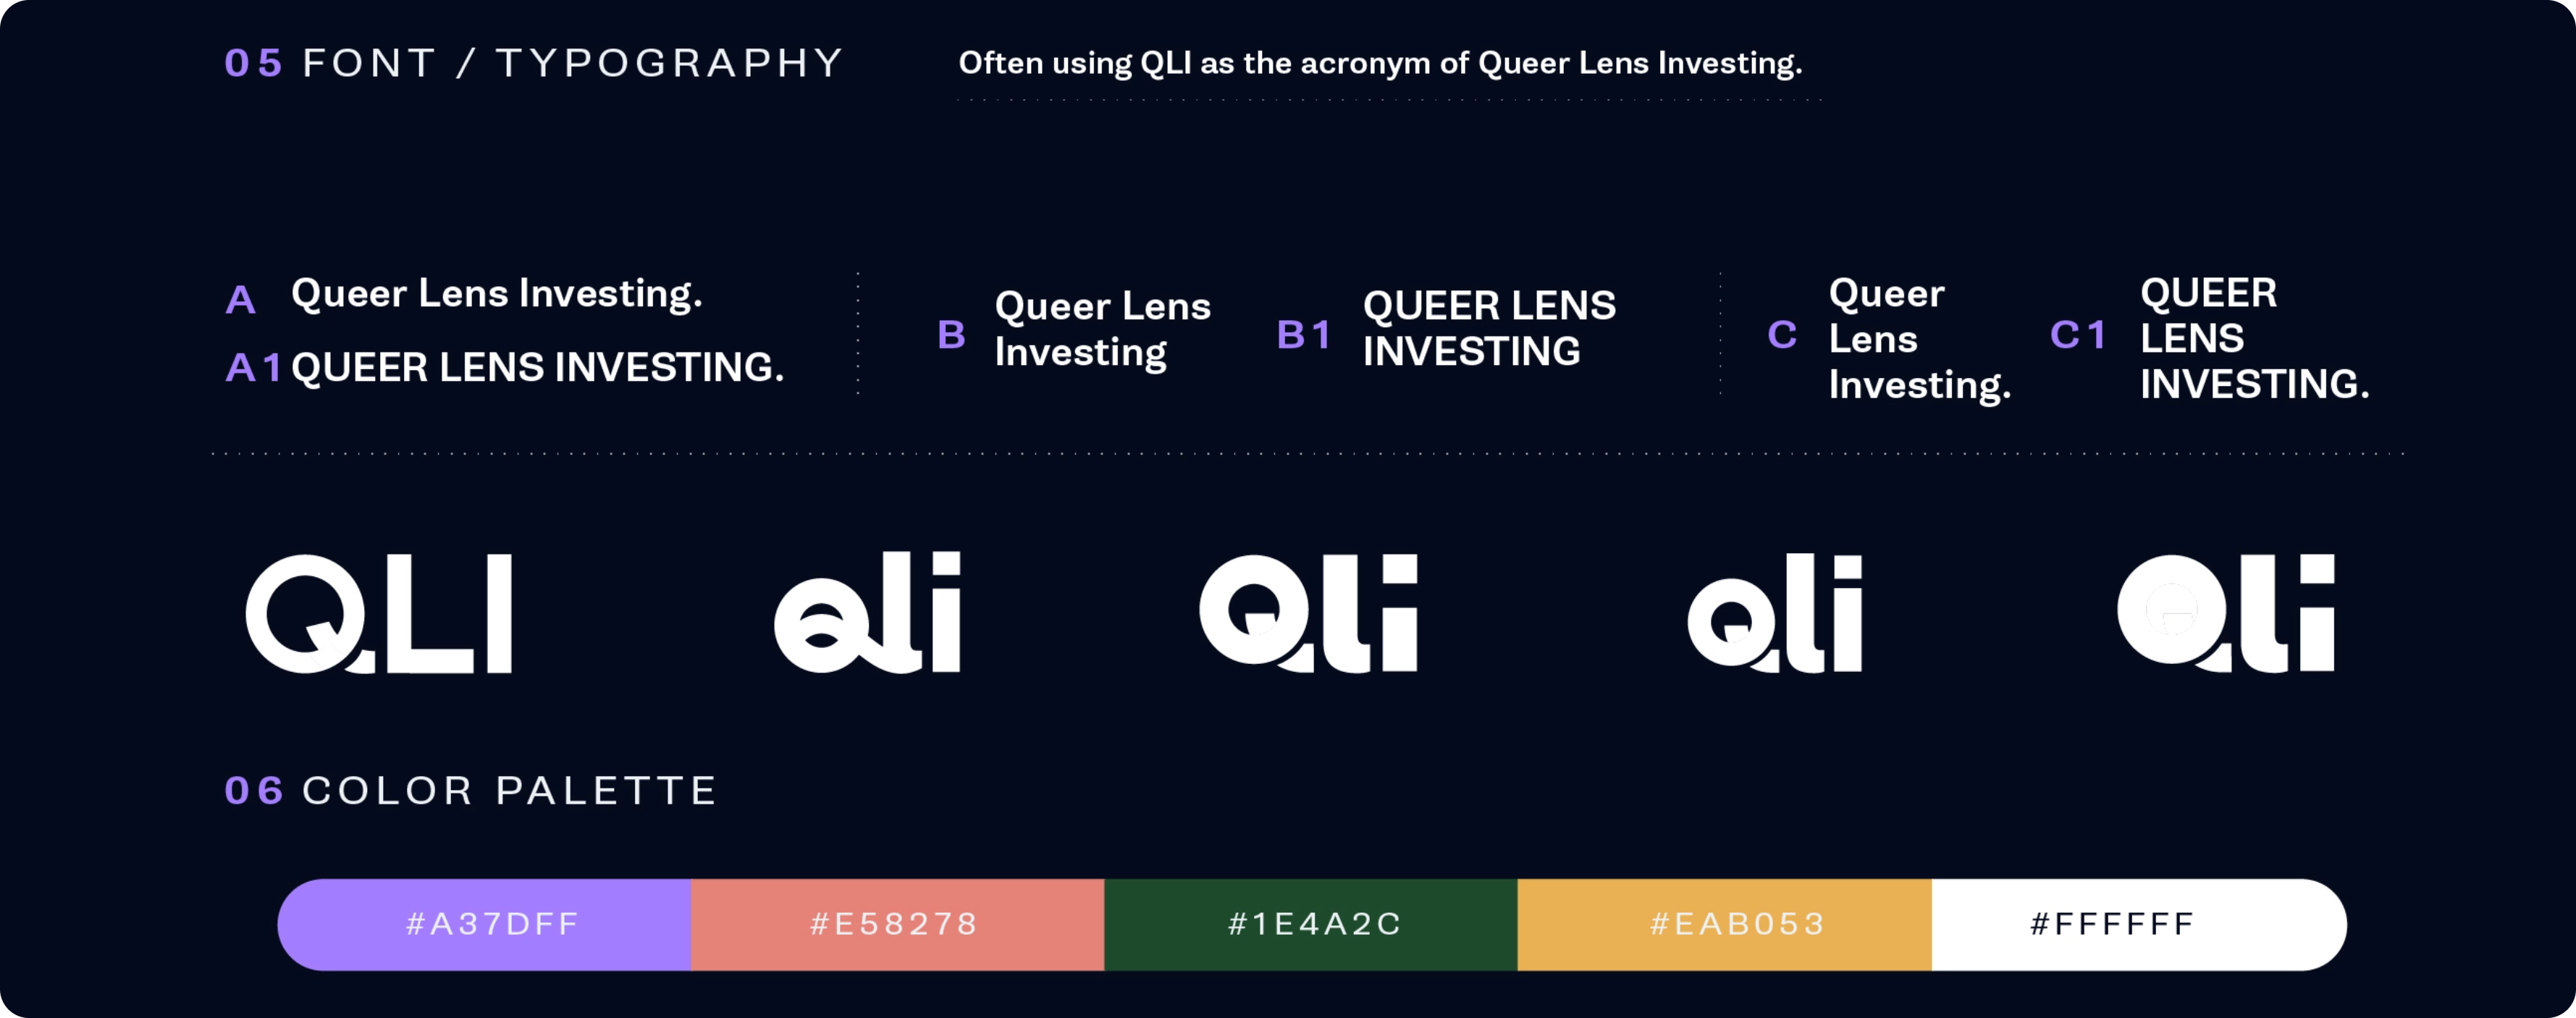 Queer Lens Investing